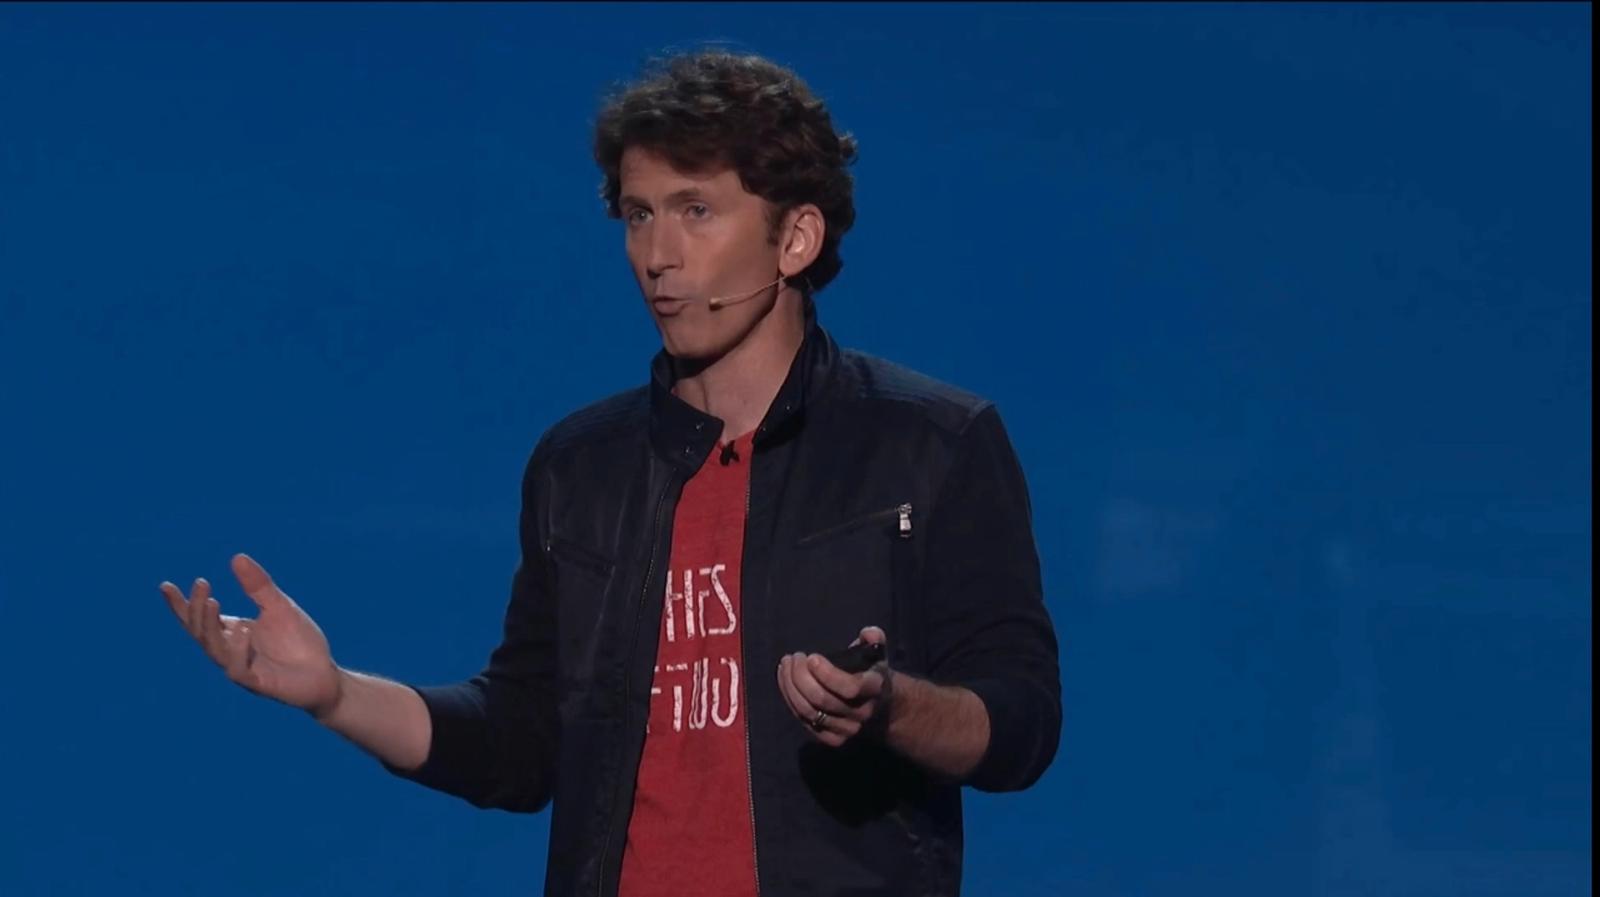 Todd Howard on stage at E3 2015